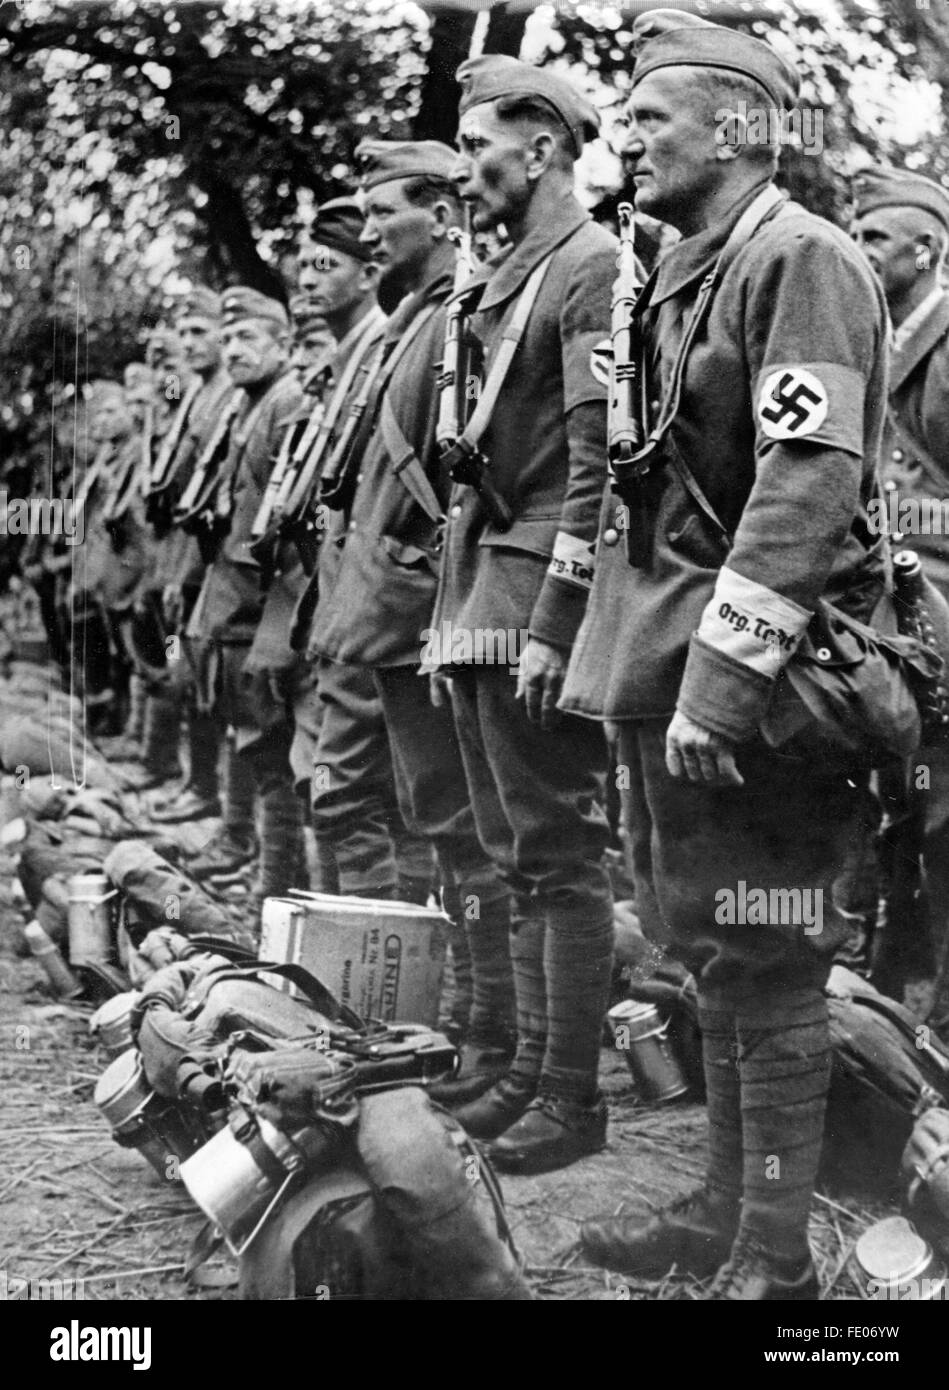 The Nazi propaganda picture shows members of the Todt Organisation wearing uniforms with swastika armbands and lettering on the sleeves as well as armament and field pack. Location and date unknown. Fotoarchiv für Zeitgeschichtee - NO WIRE SERVICE - Stock Photo